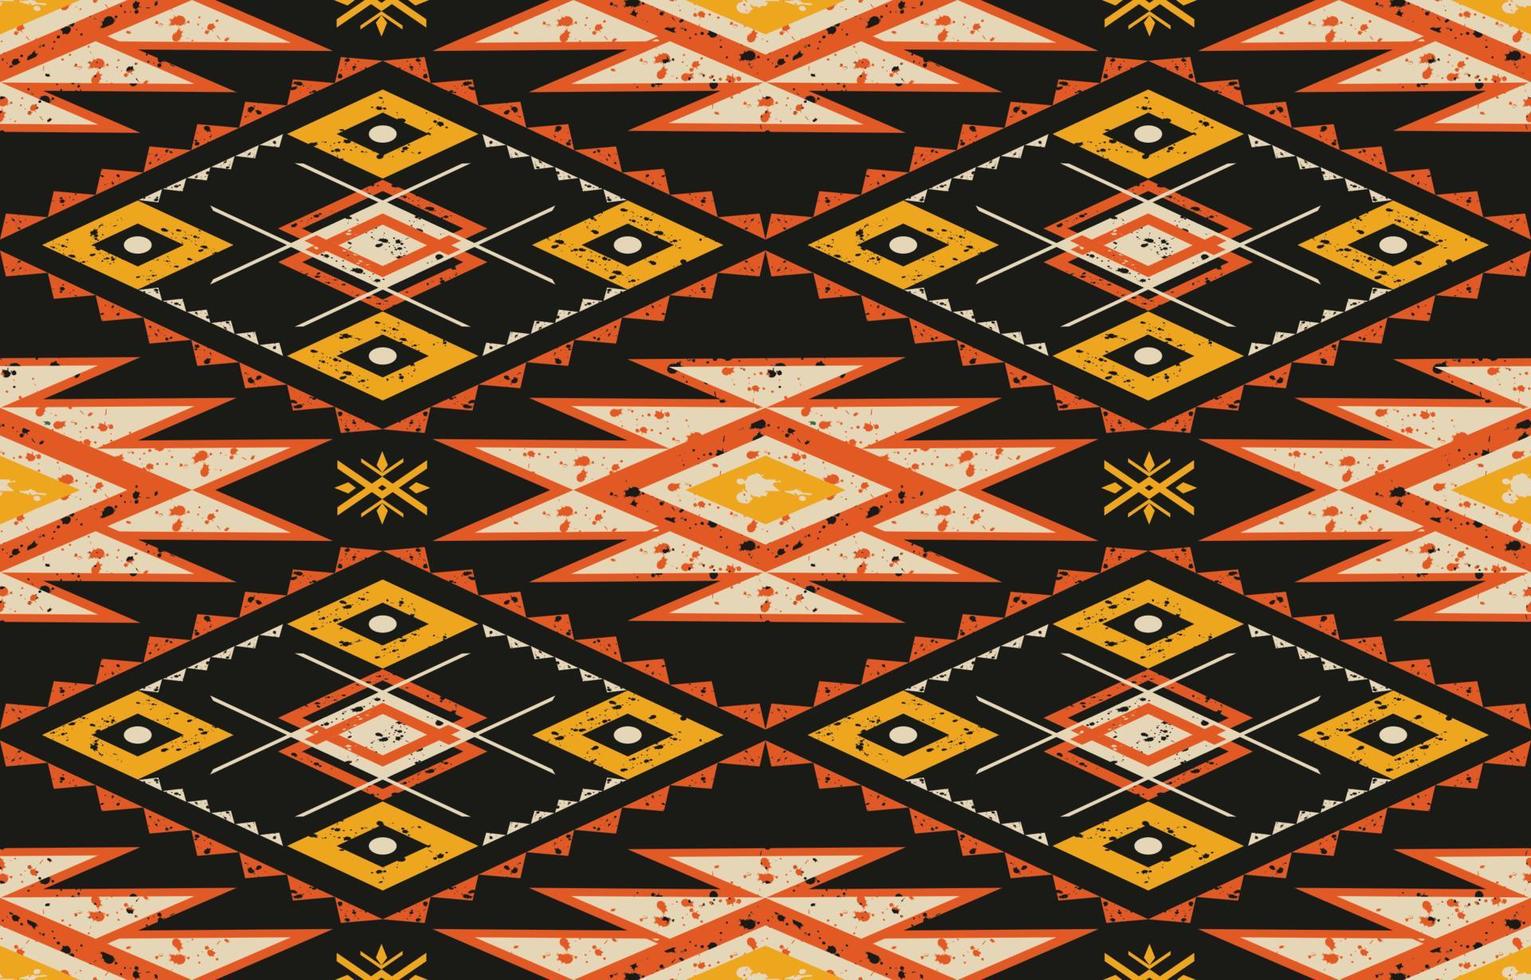 Geometric pattern seamless,Tribal ethnic texture,design for printing on products,traditional for background,scarf,clothing,wrapping,fabric,carpet,wallpaper,batik,embroidery style.vector illustration. vector